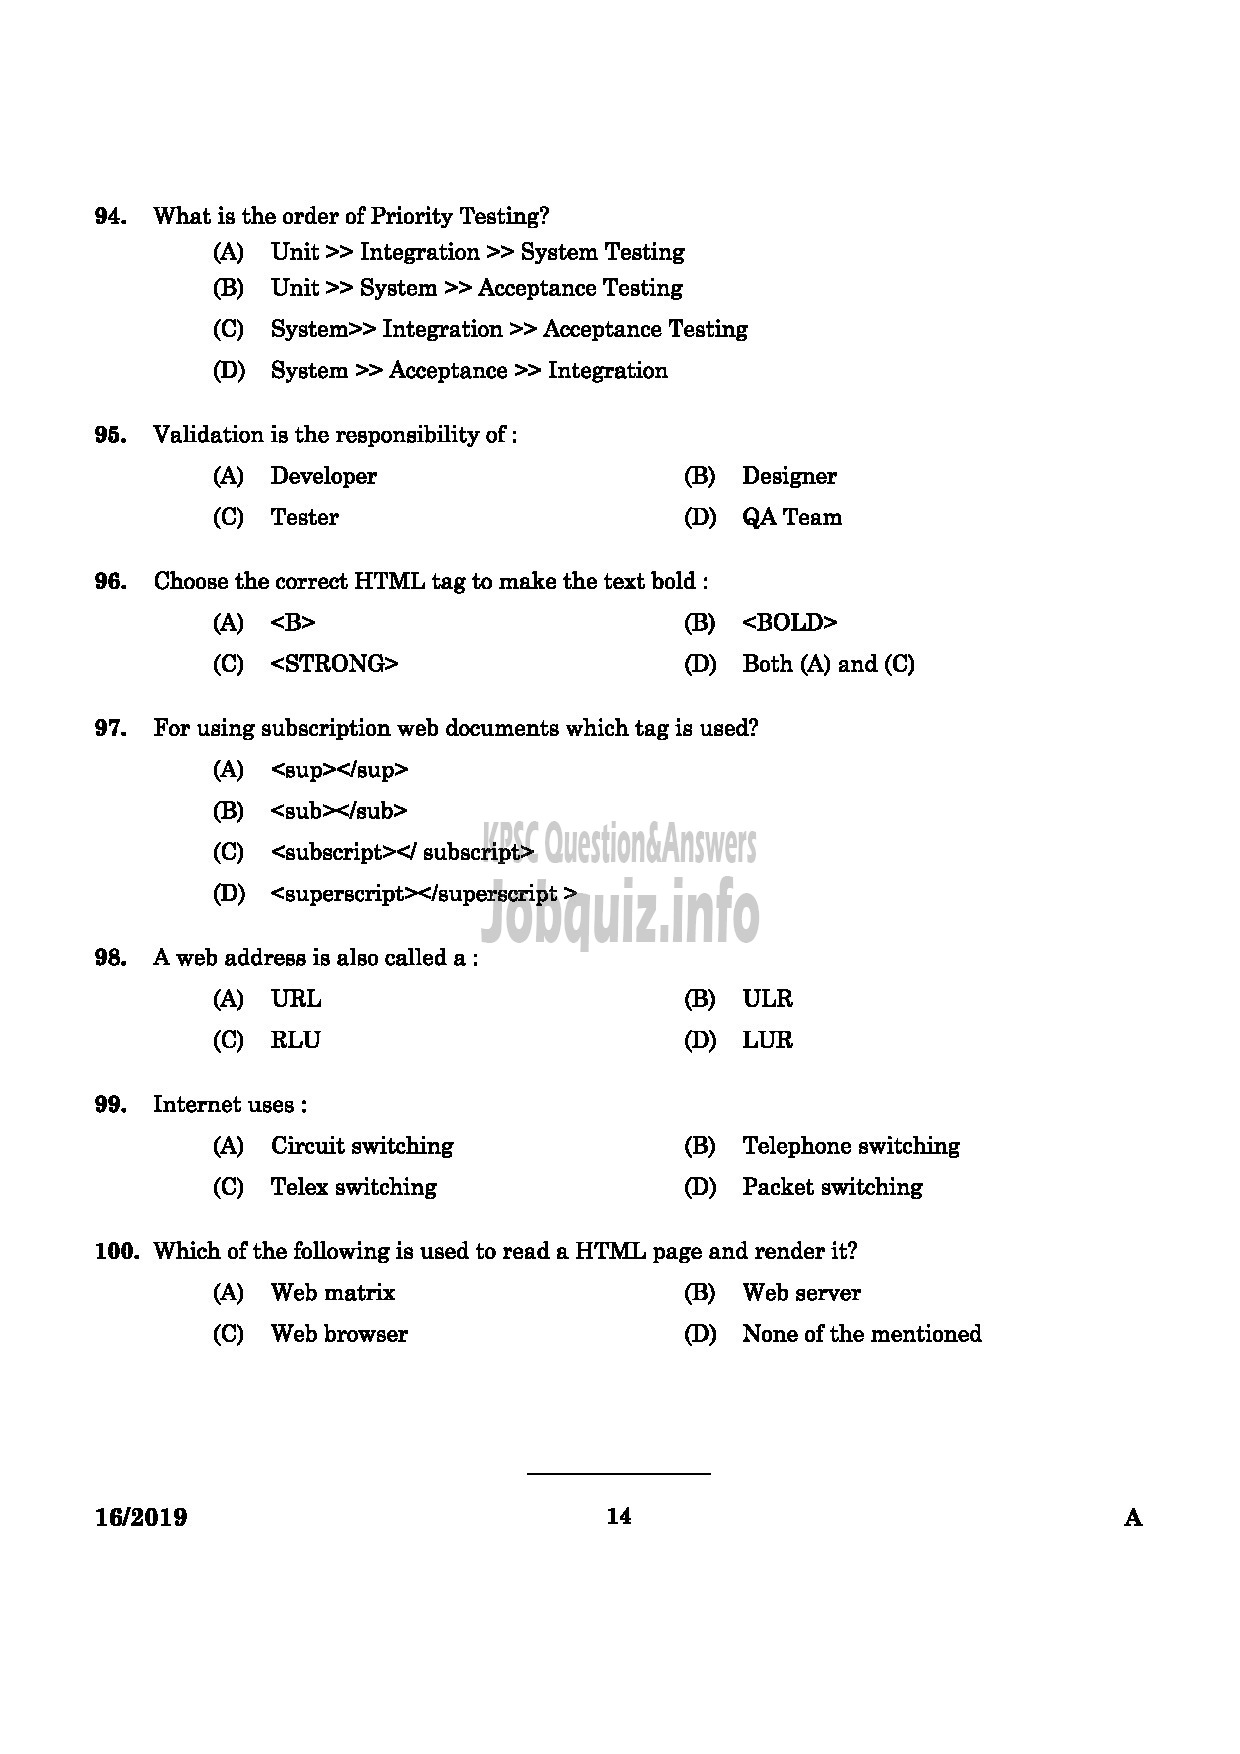 Kerala PSC Question Paper - JUNIOR INSTRUCTOR SOFTWARE TESTING ASSISTANT INDUSTRIAL TRAINING -12